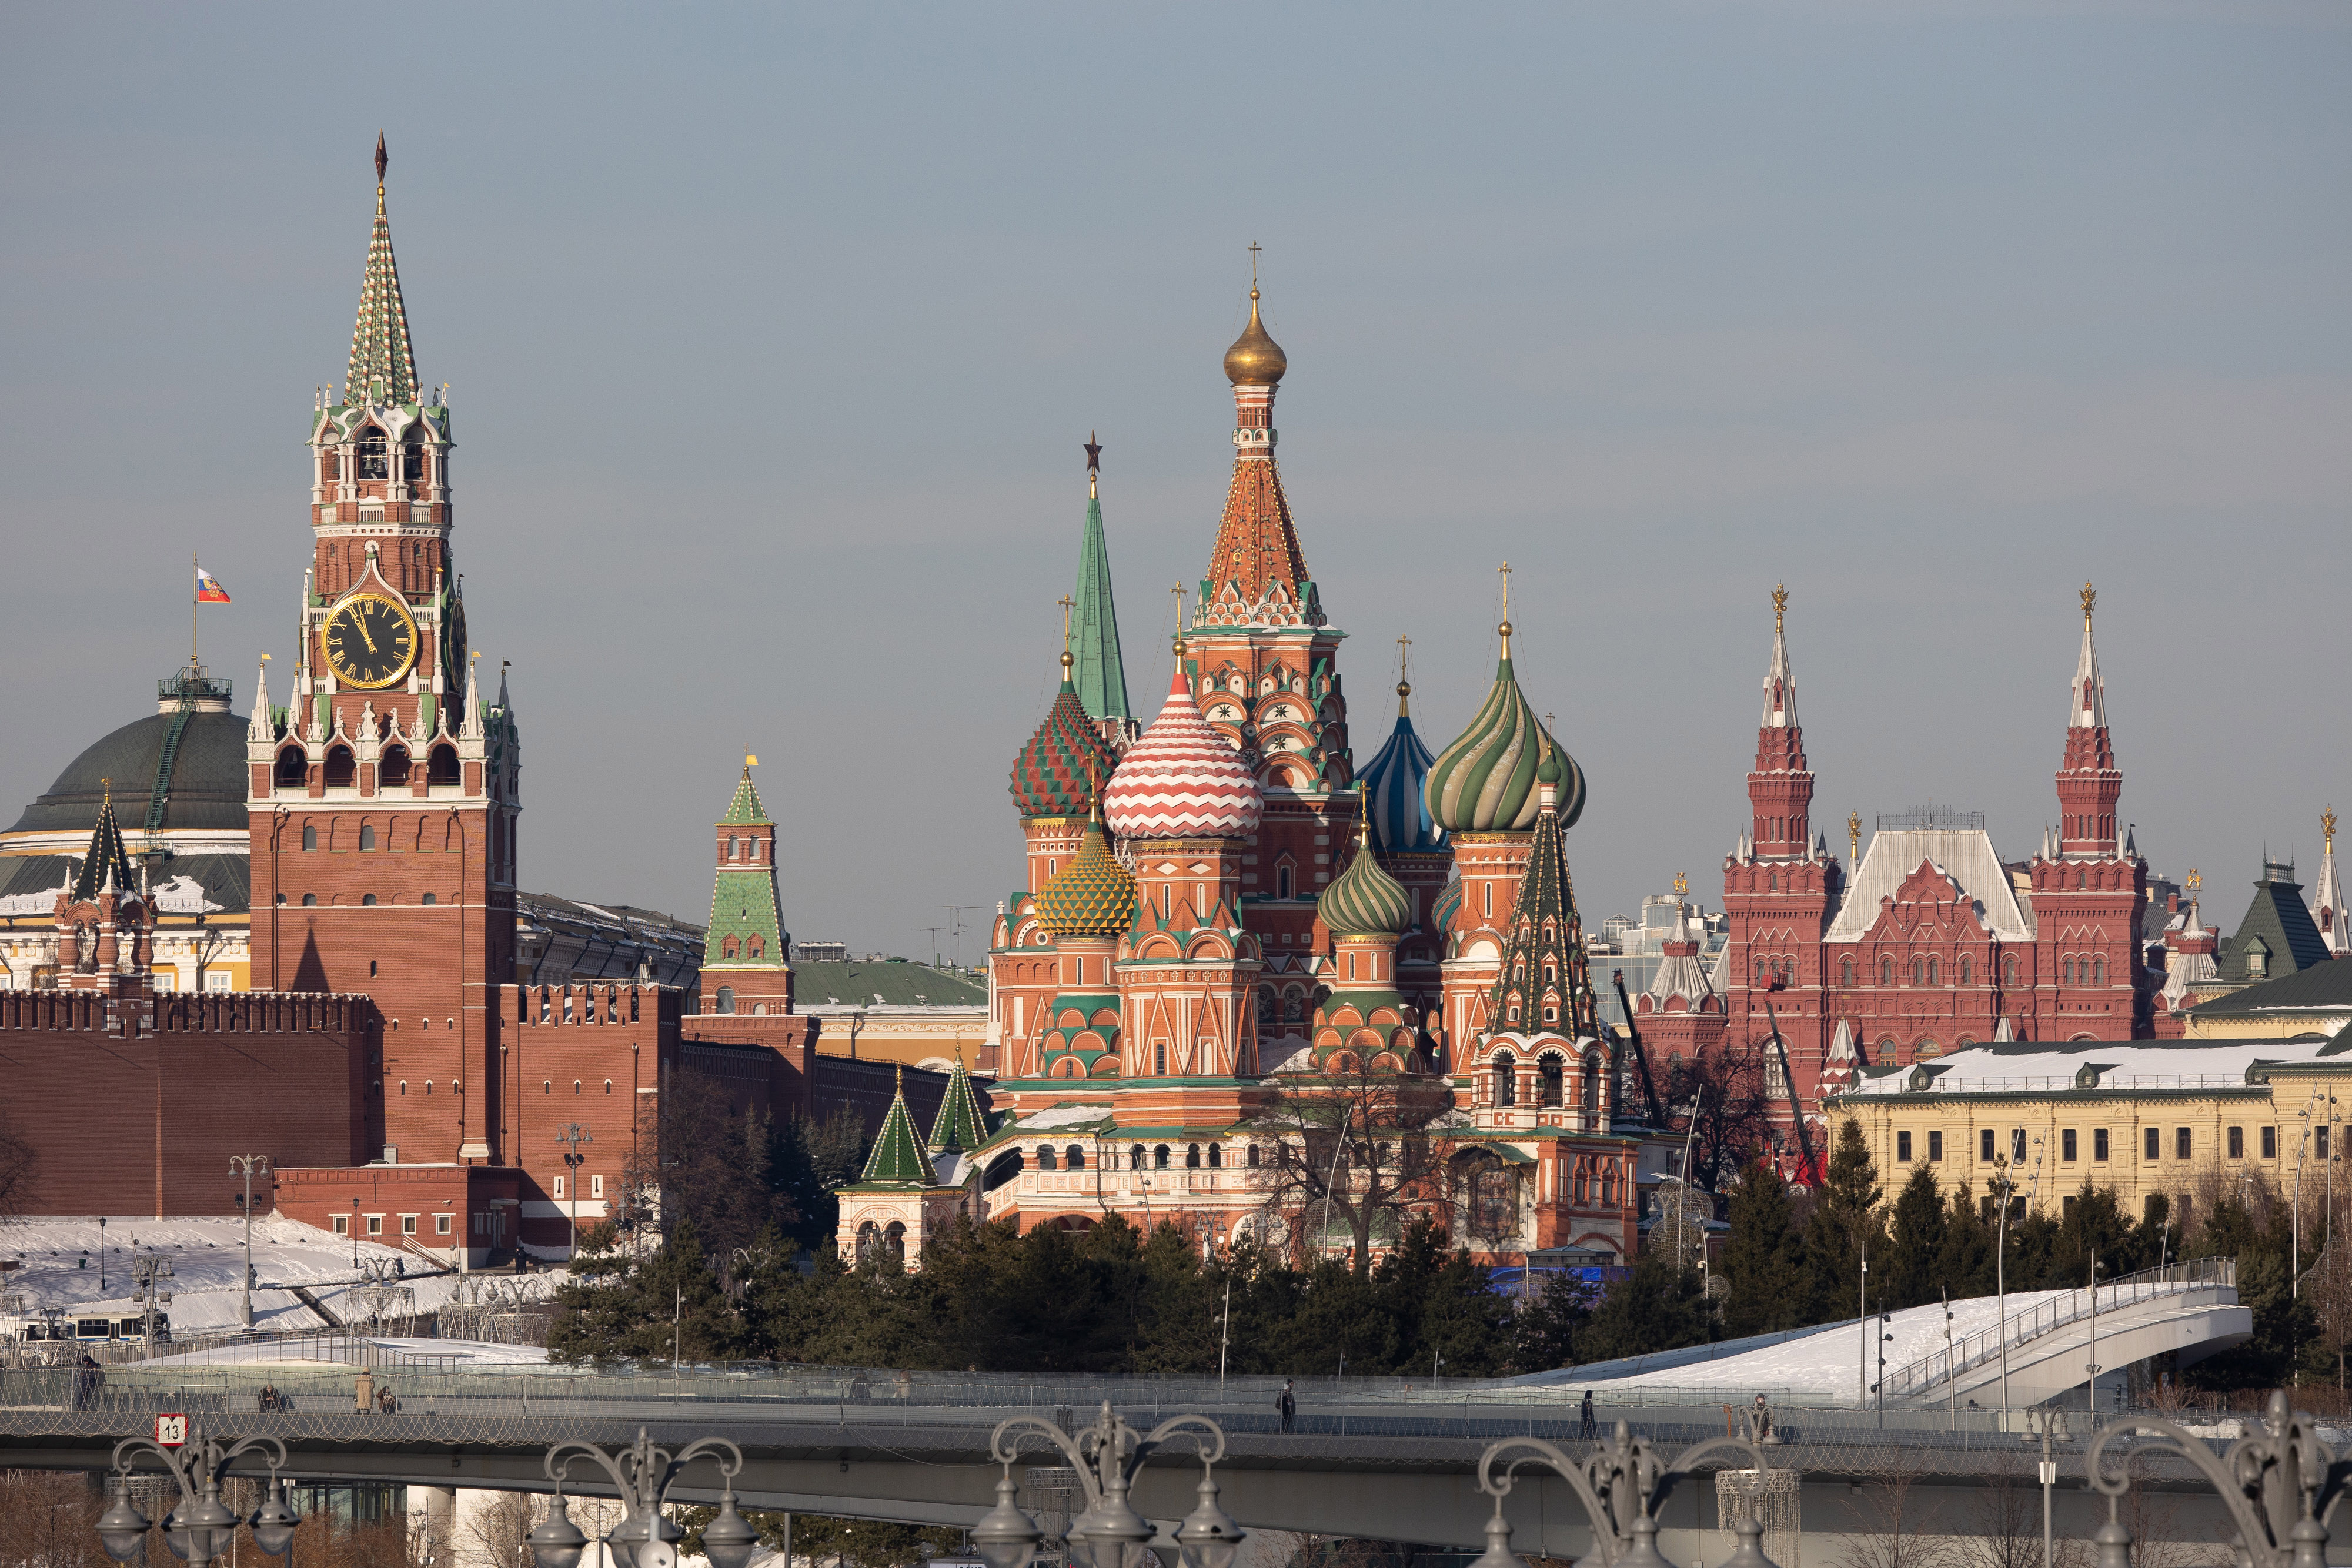 The Spasskaya tower of the Kremlin, left, and Saint Basil's Cathedral, center, in Moscow, Russia, on February 15.